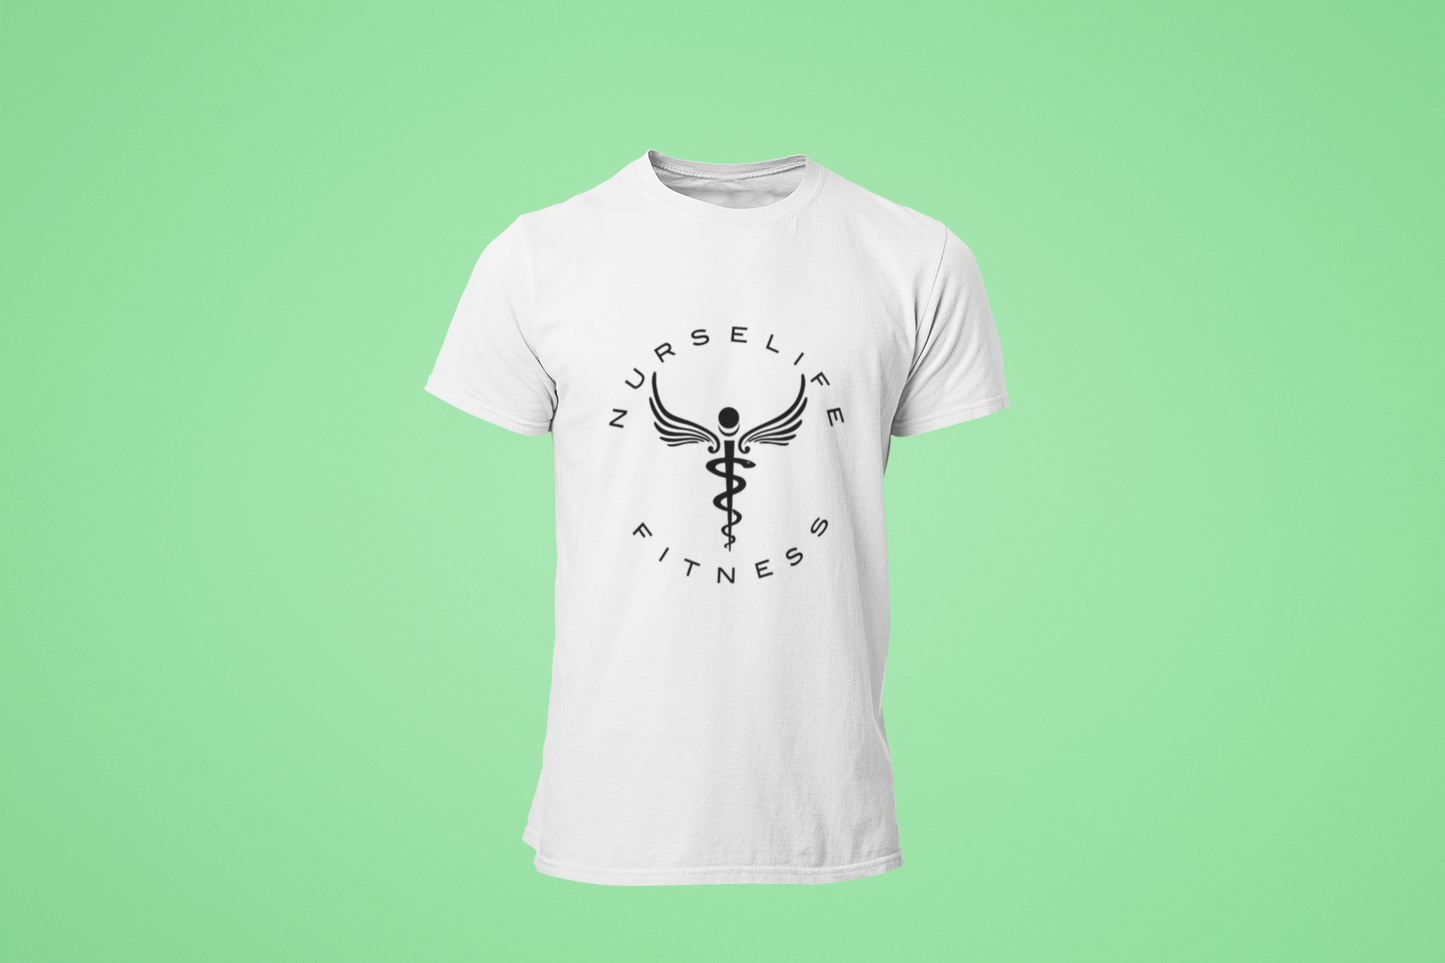 Nurse Life Fitness Collection Men's T-Shirts